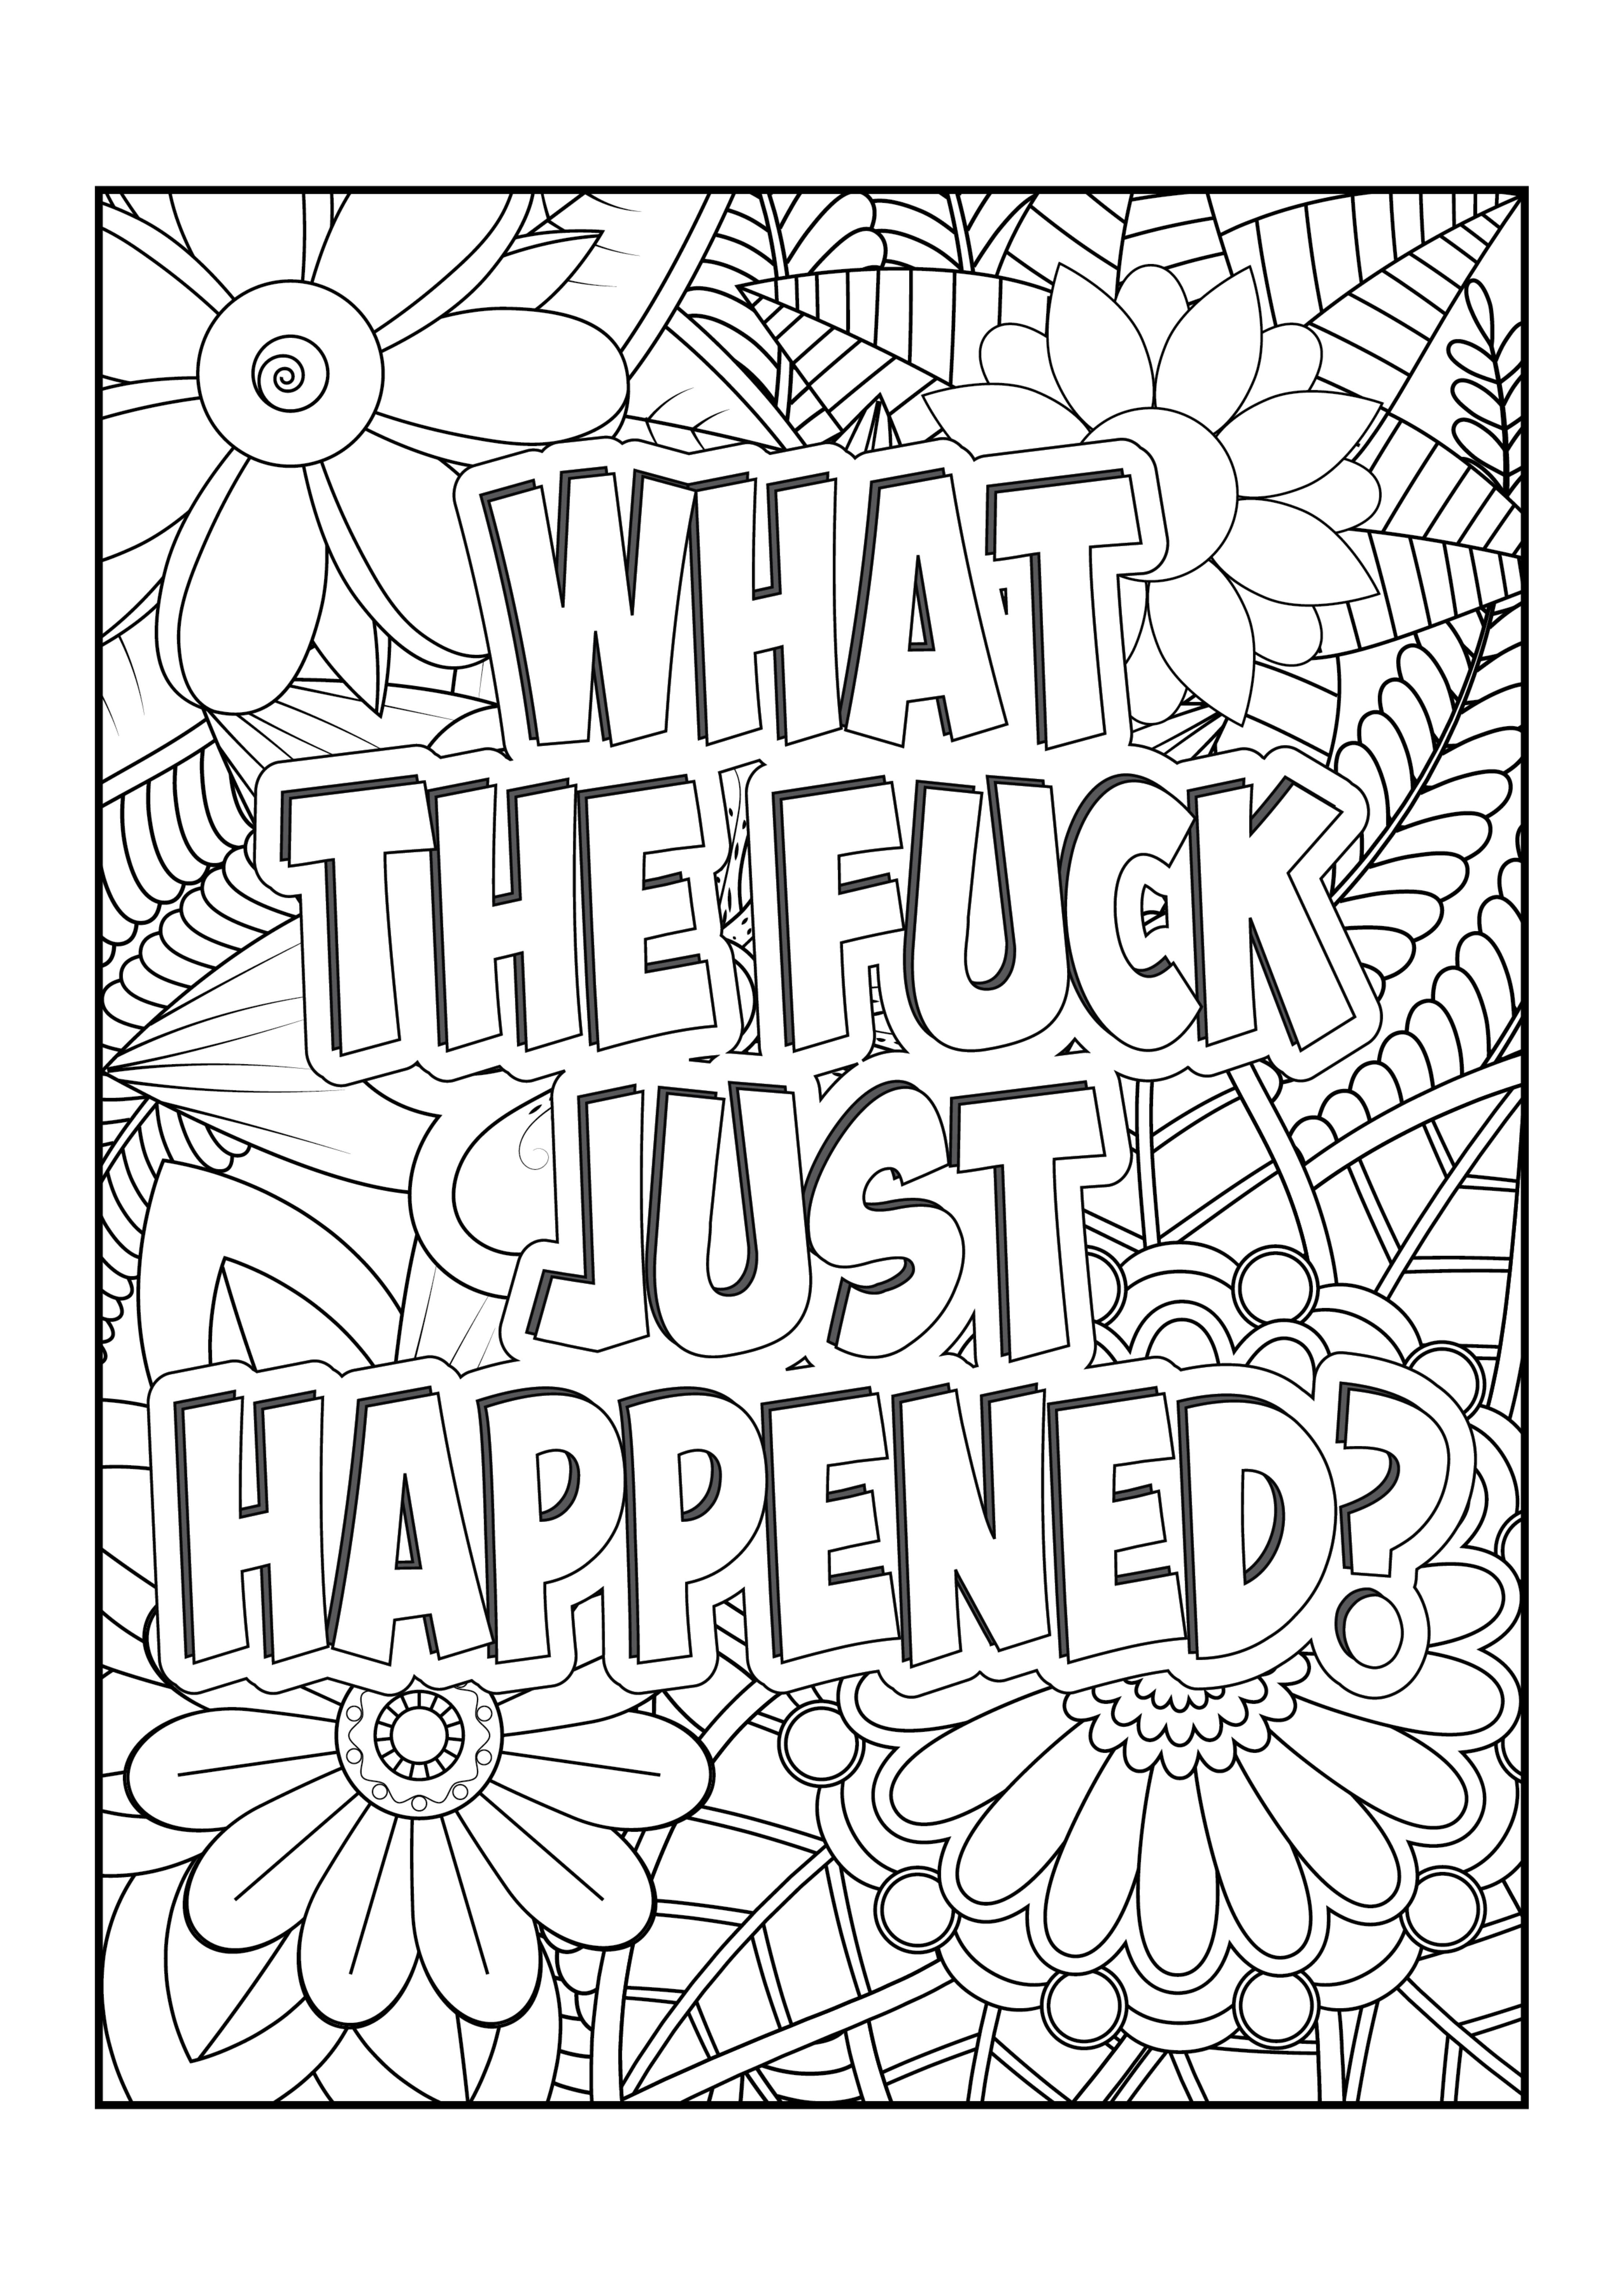 Swear word coloring book available to download